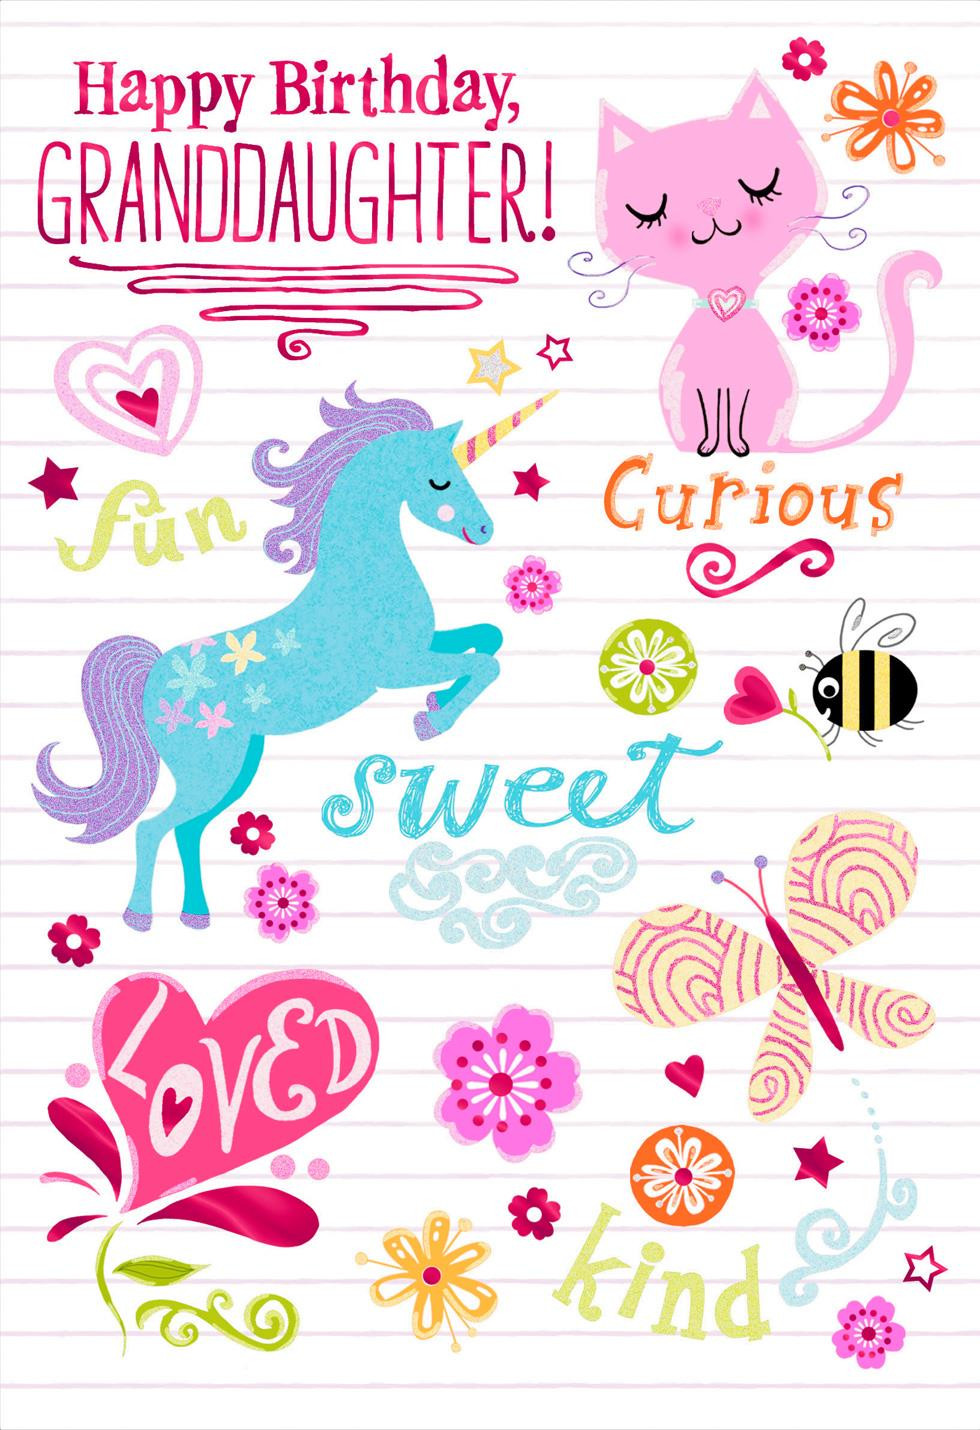 Birthday Cards Pictures
 Unicorn and Cat Birthday Card for Granddaughter Greeting